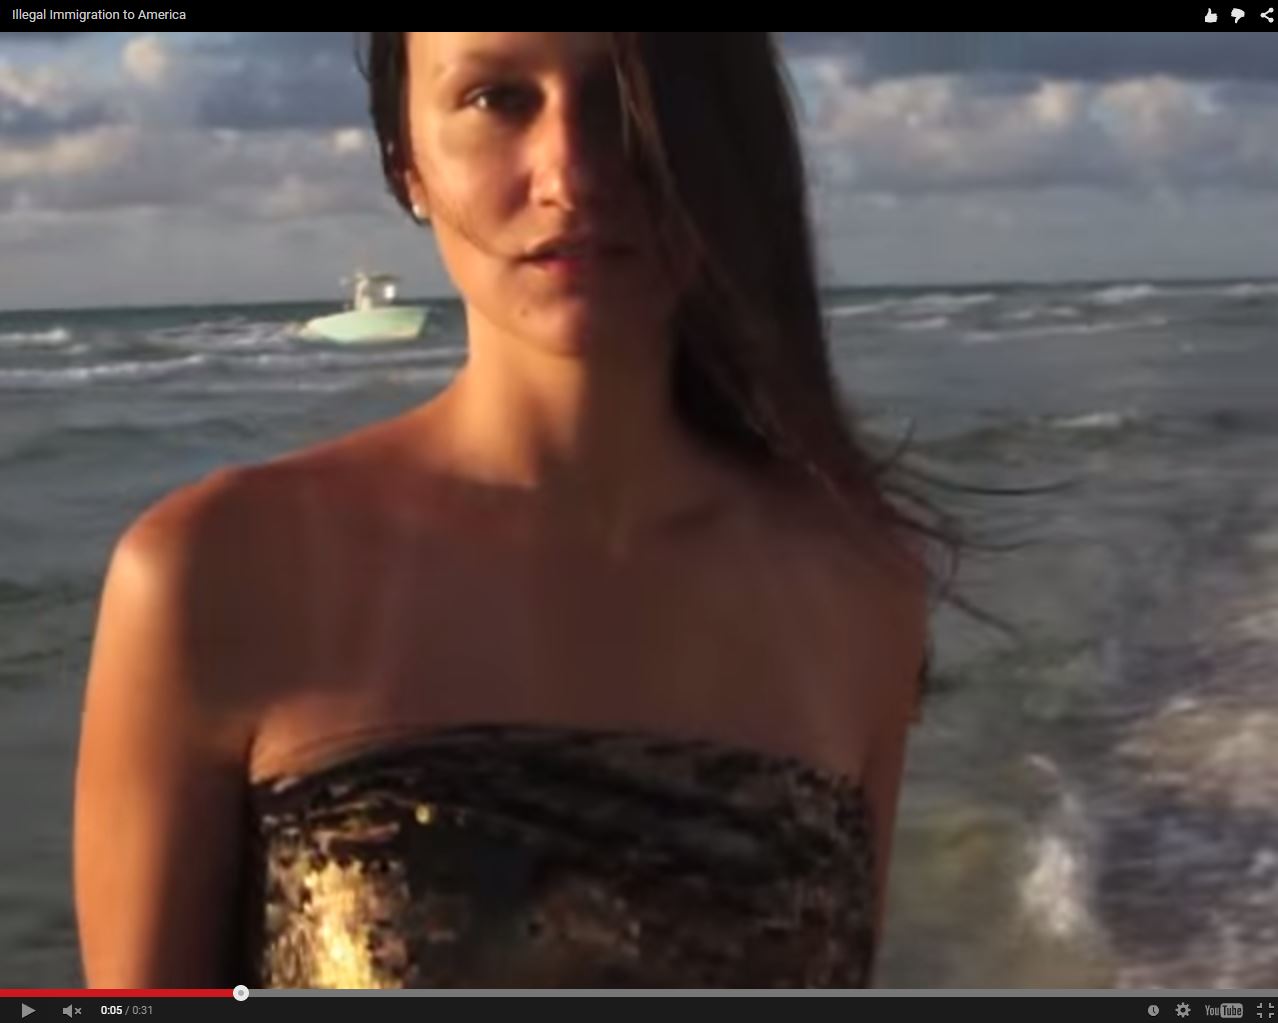 Models Miami Beach Video Shoot Interrupted By Boat Of Immigrants Running Ashore 